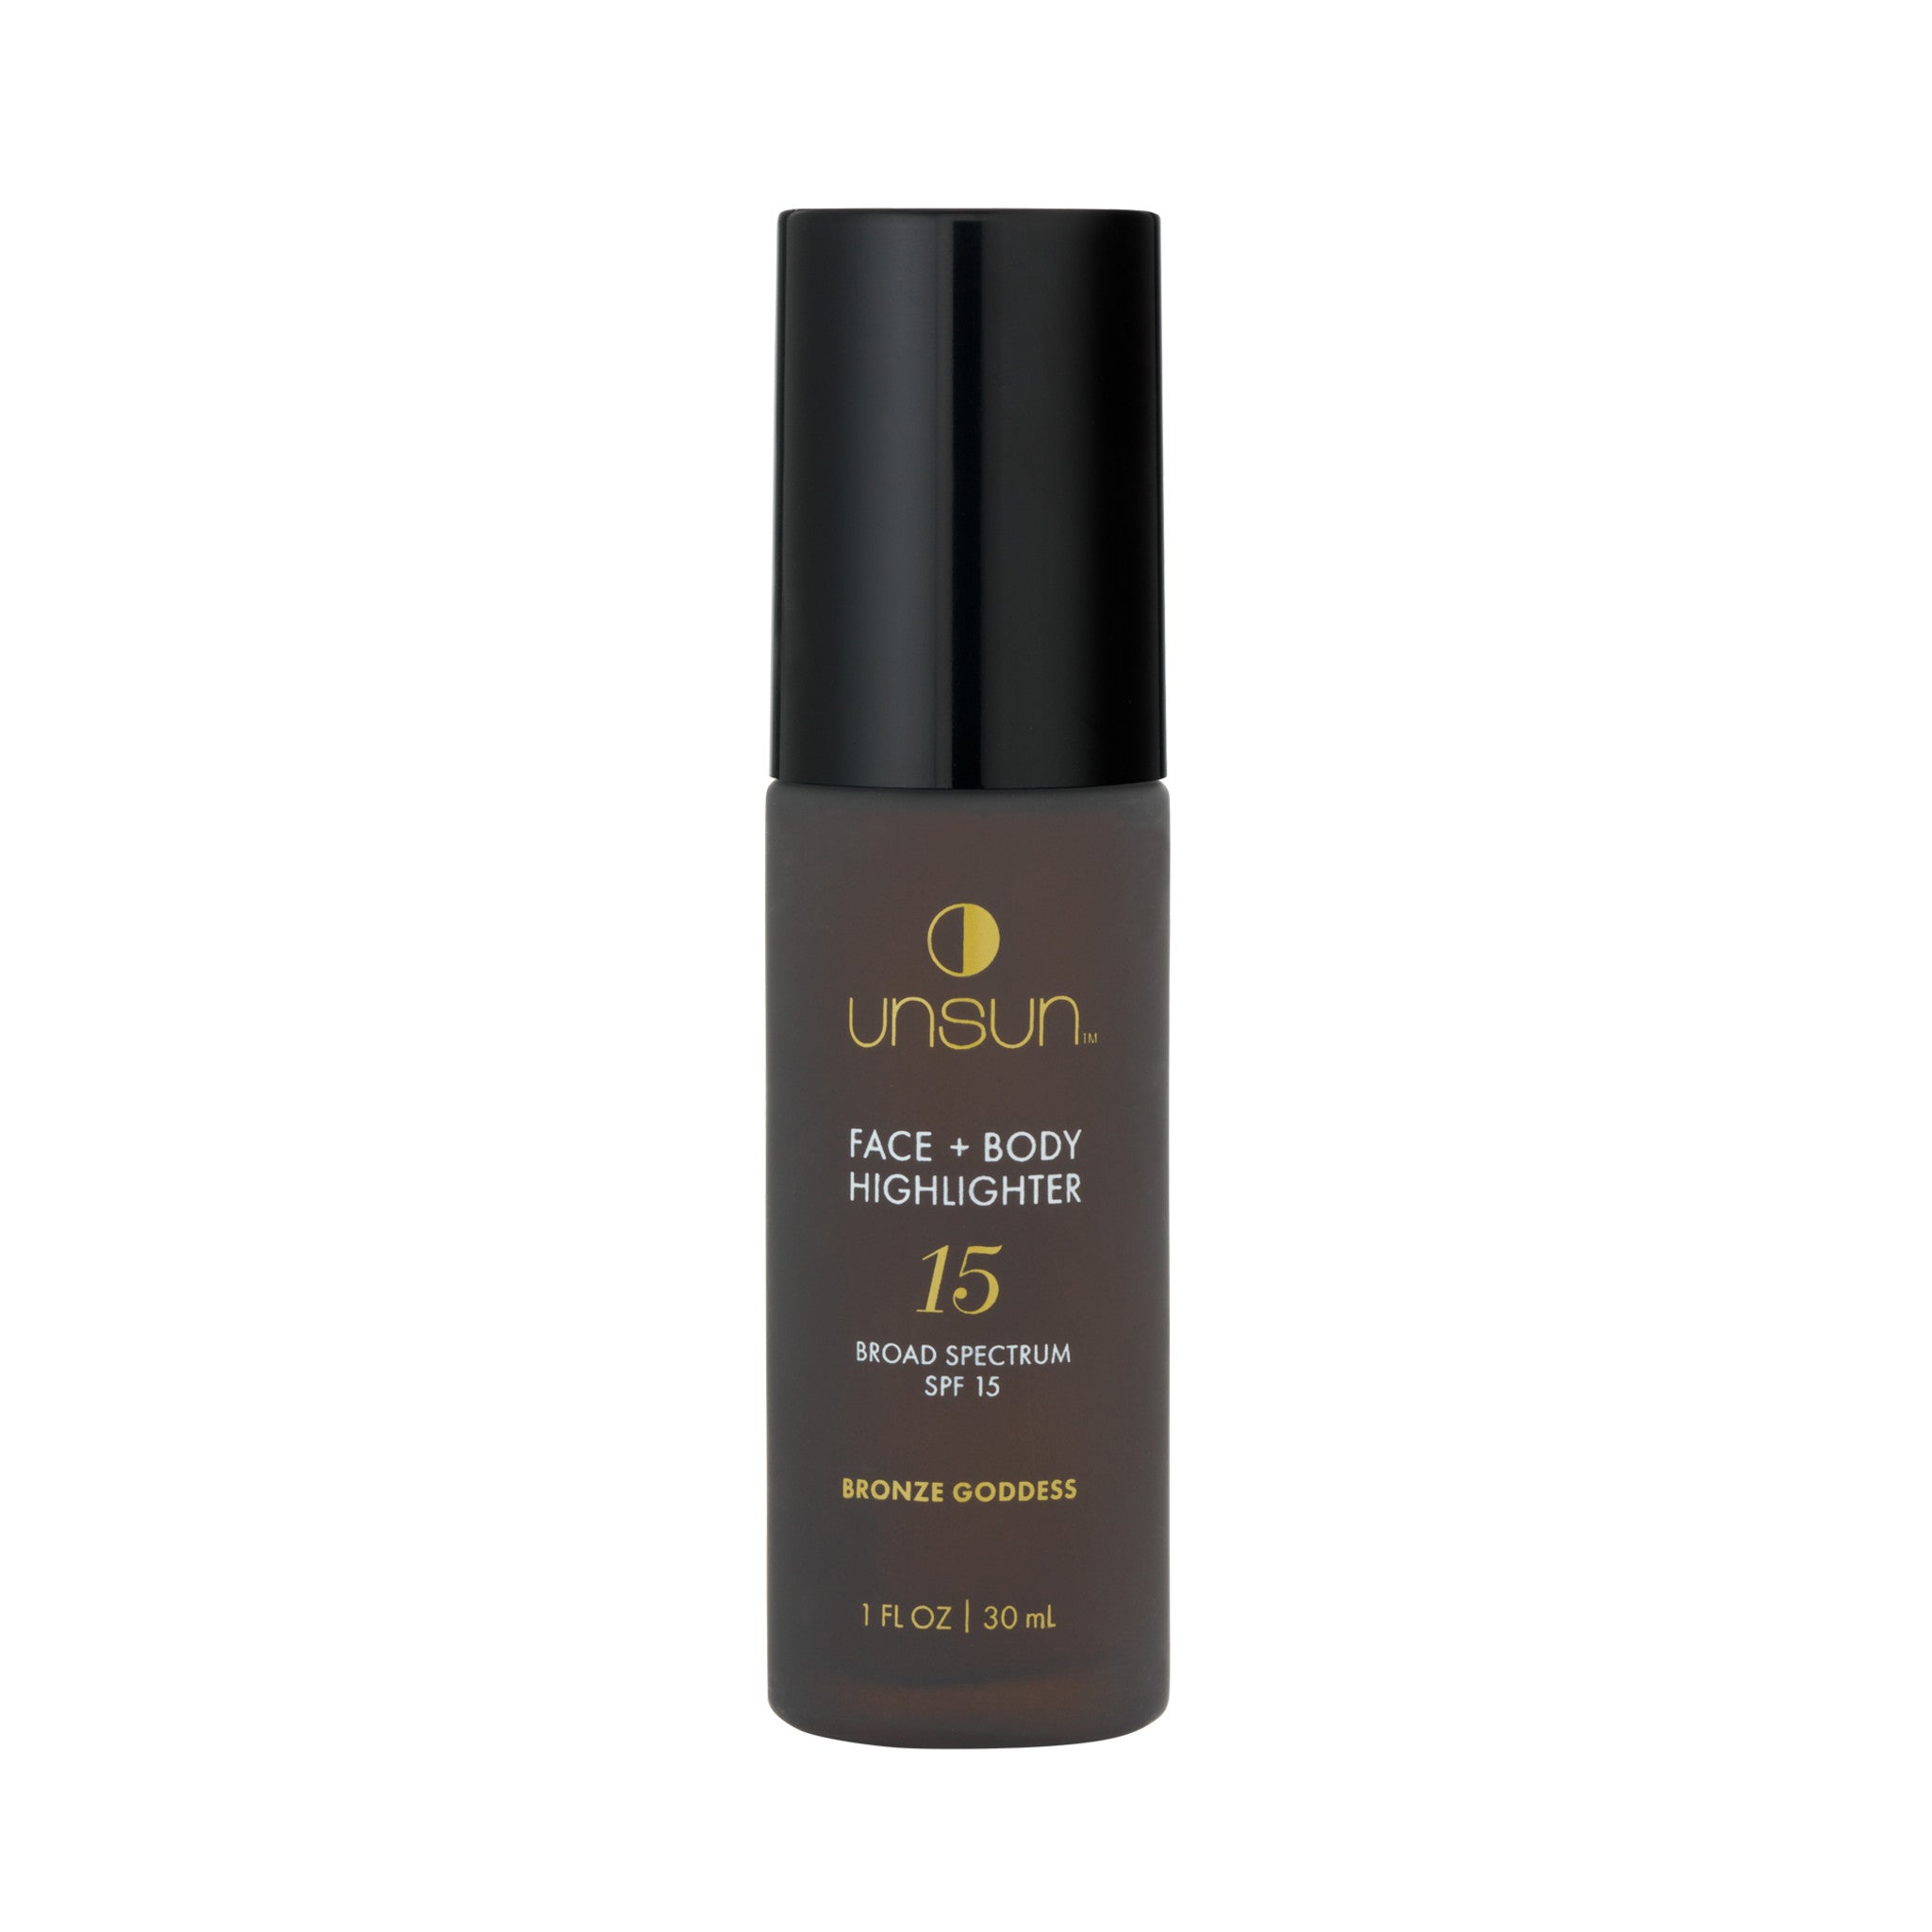 Face and Body Highlighter SPF 15 main image.